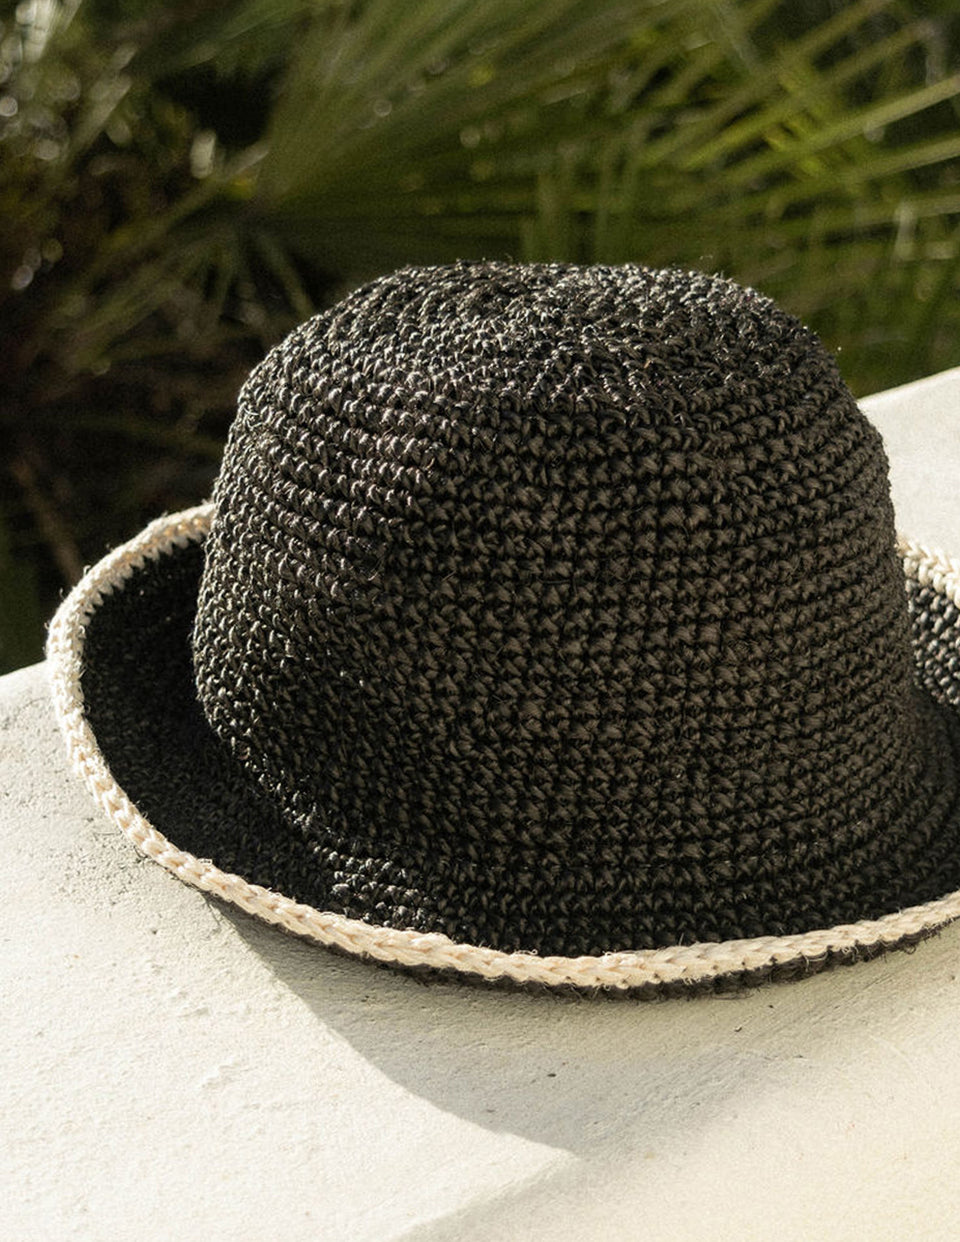 The Black & White Trimmed Bucket Hat